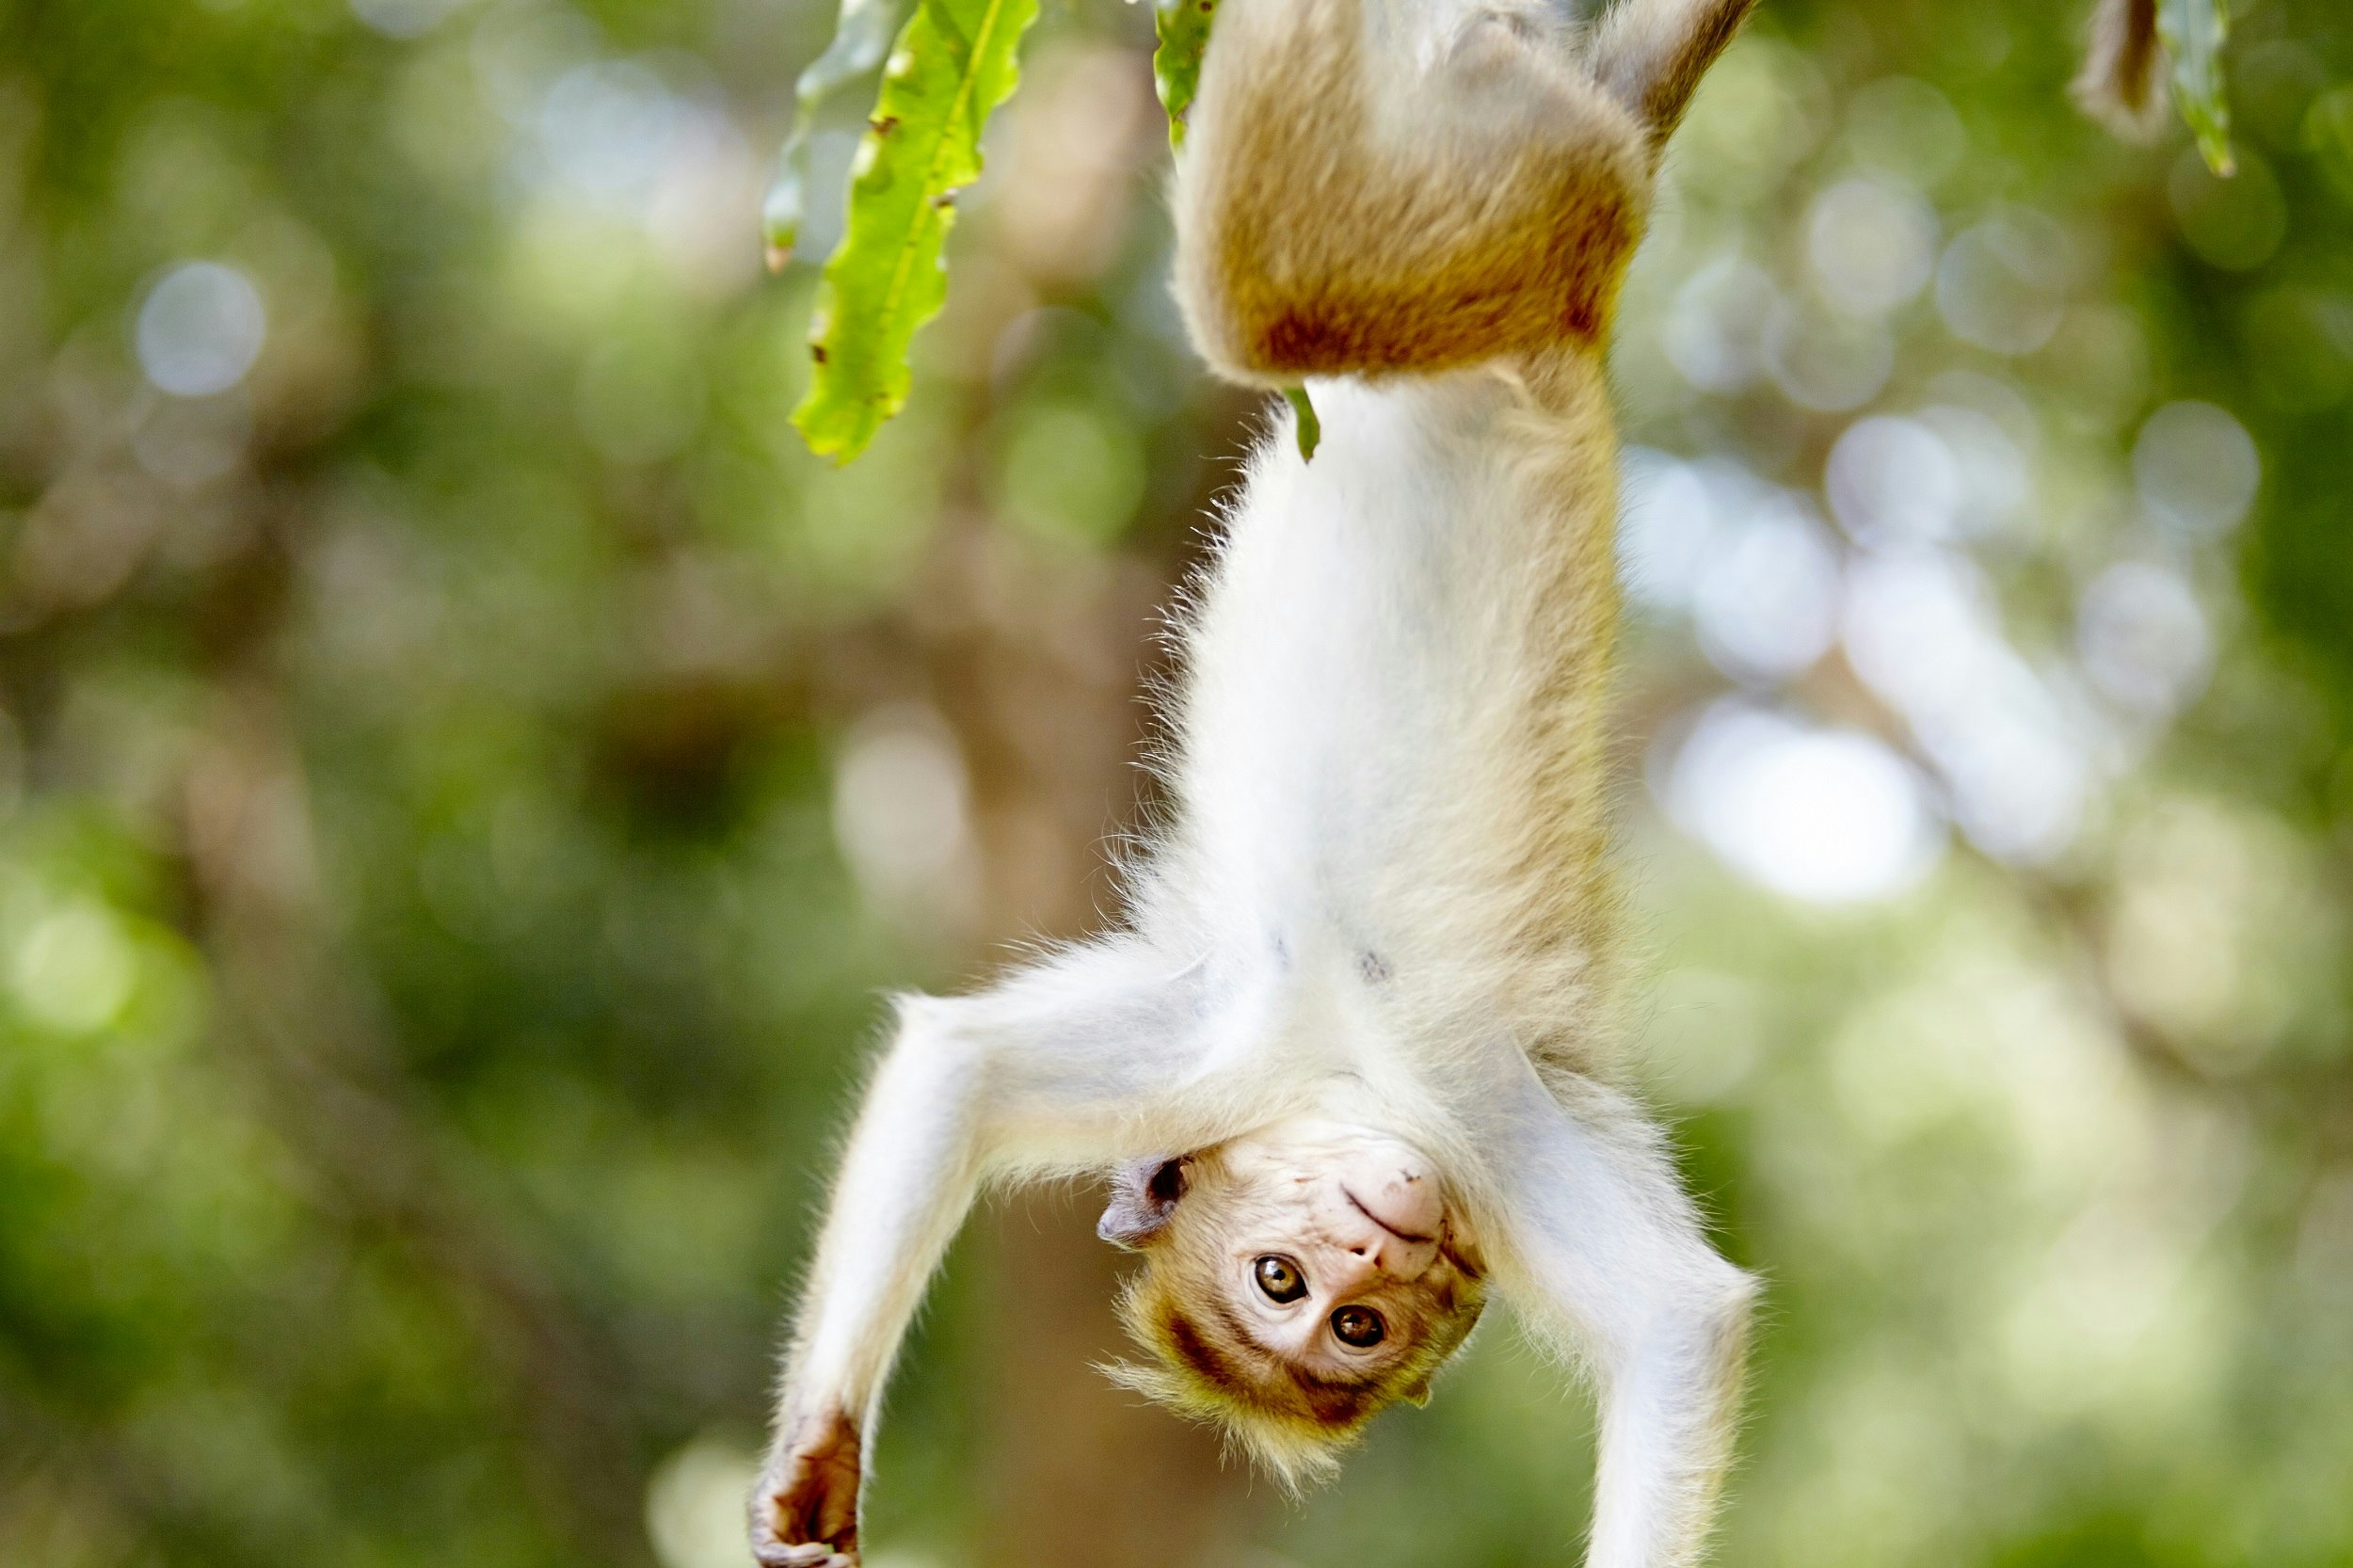 A young macaque monkey hanging upside down in dense vegetation.